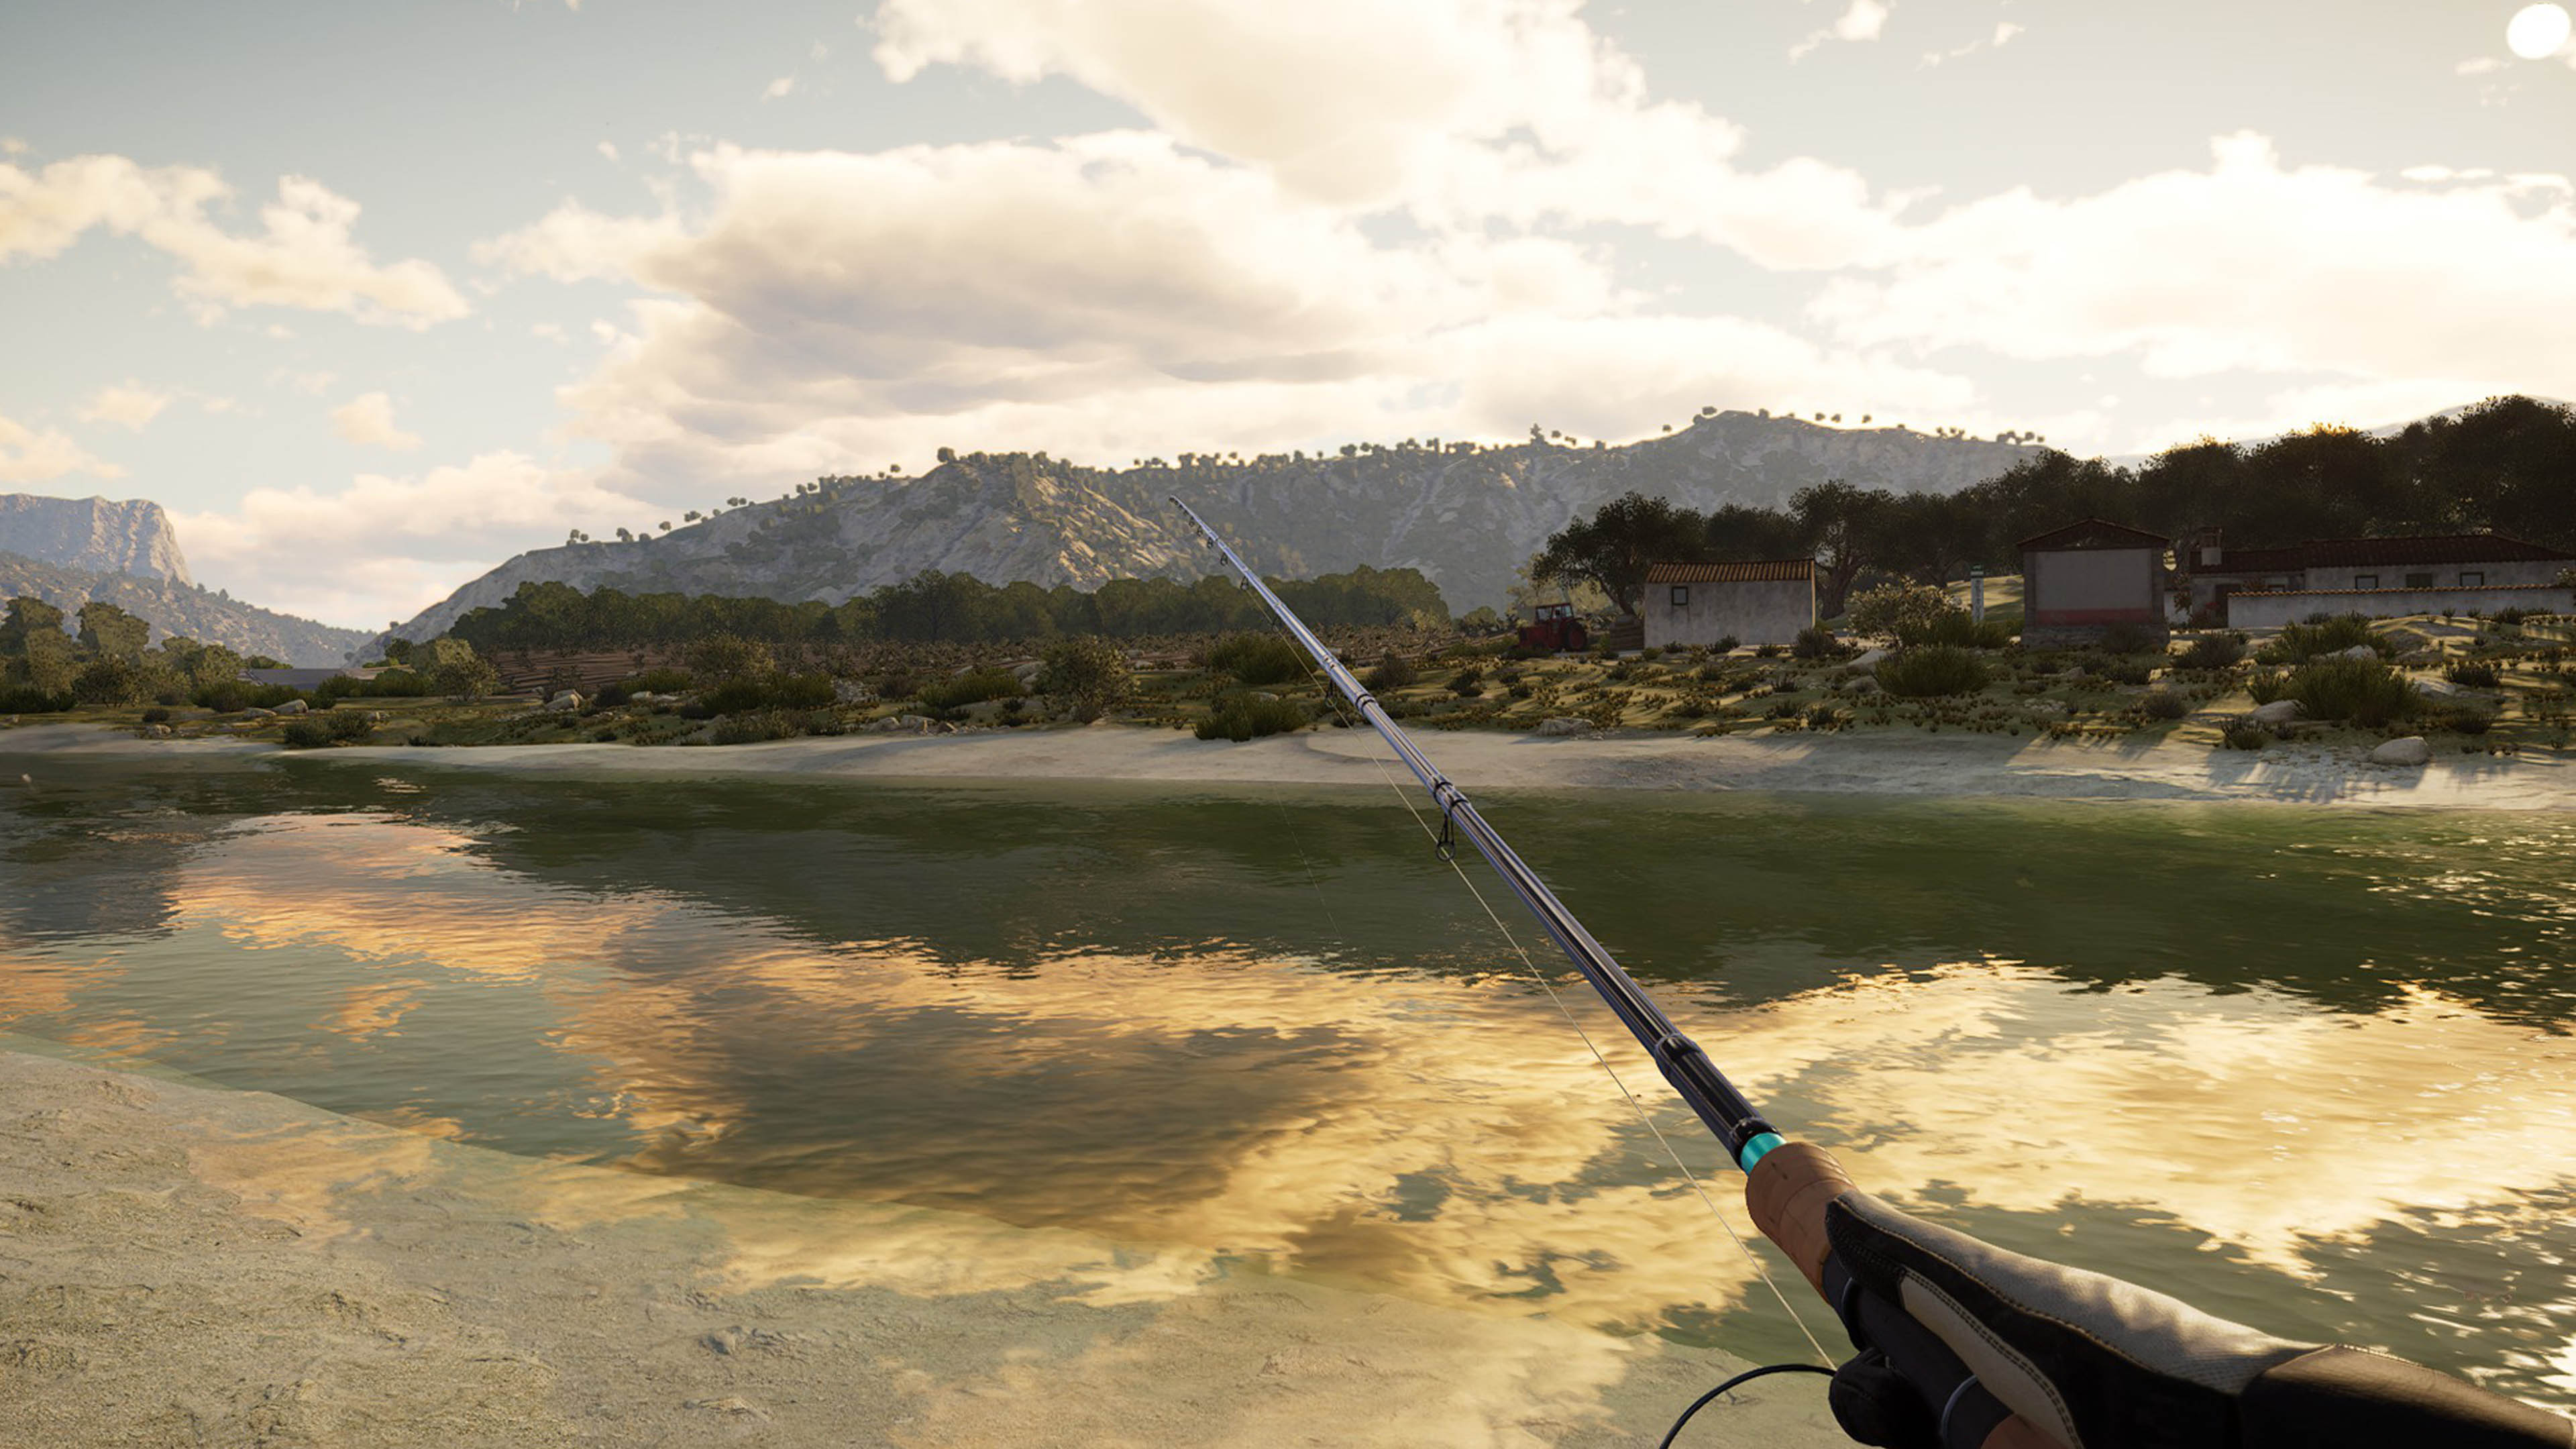 Call of the Wild: The Angler™ - Spain Reserve